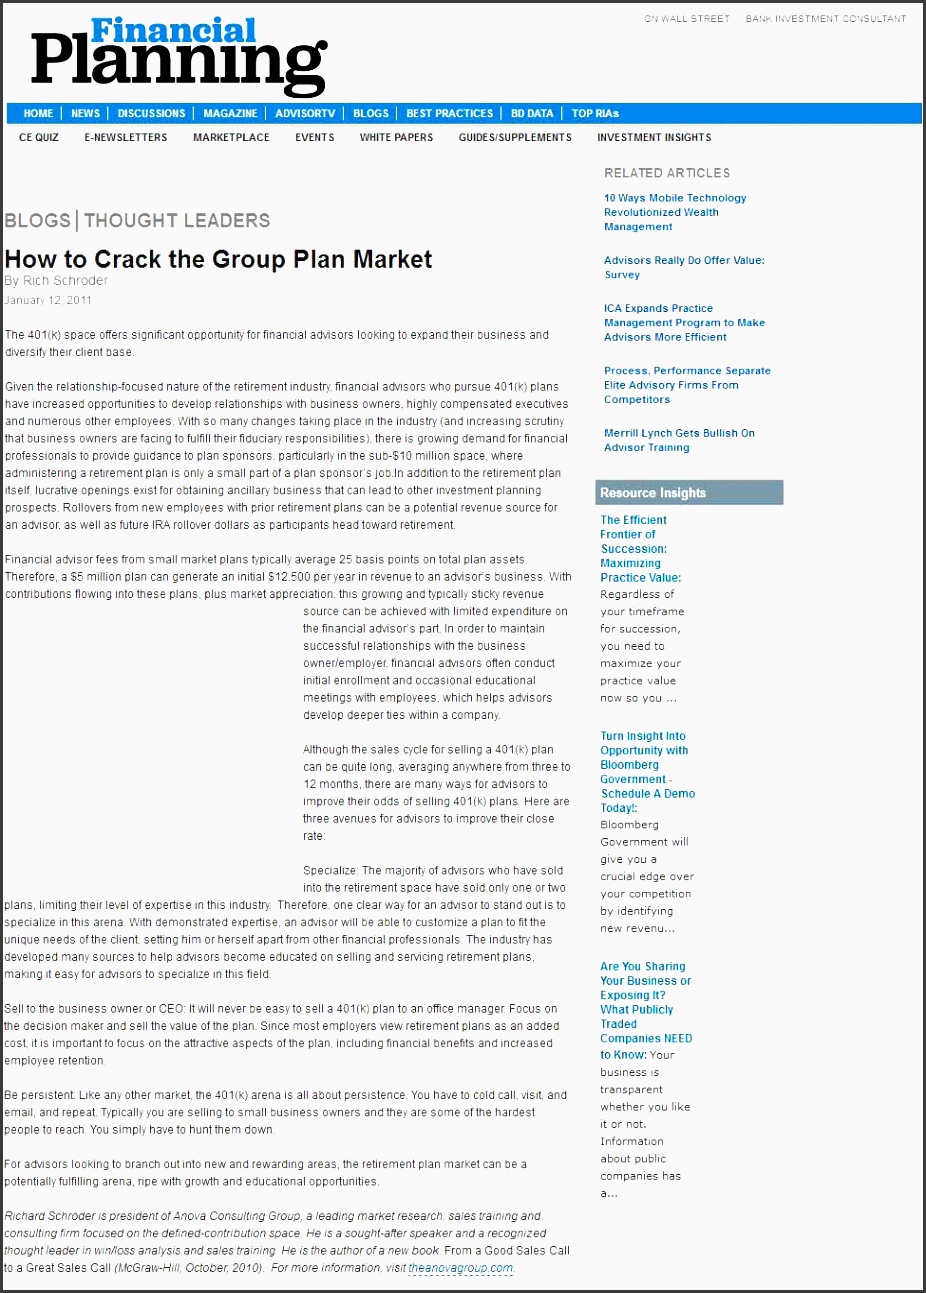 how to crack the group retirement plan market rich schroder thought l business plan financial business